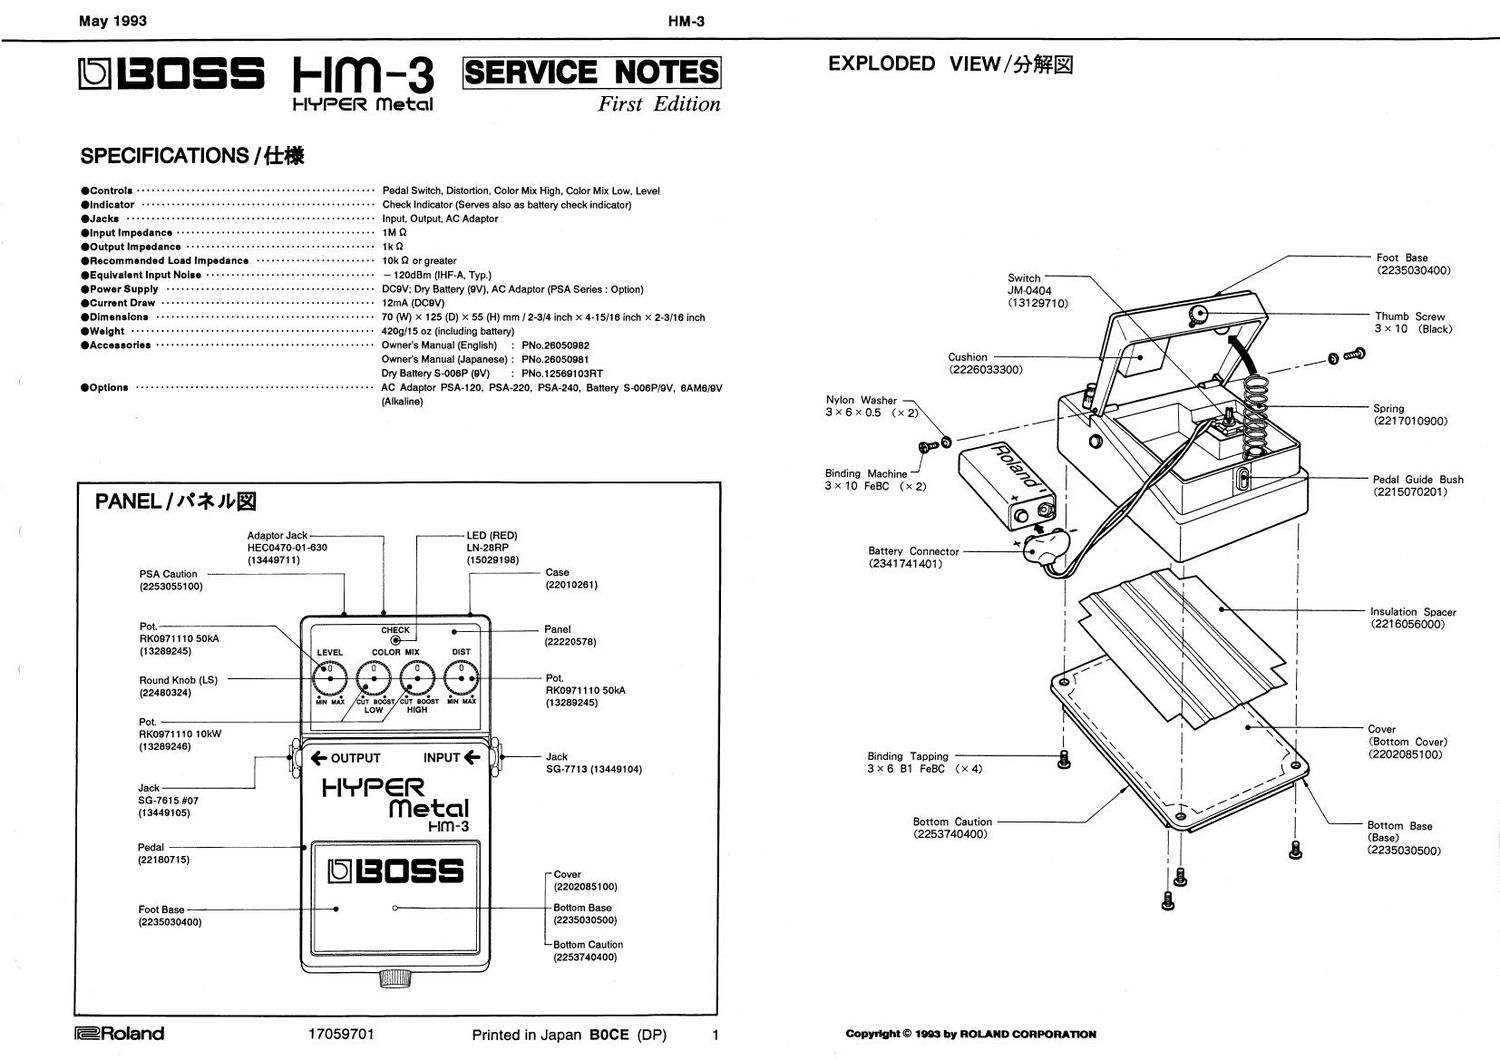 BOSS HM 3 SERVICE NOTES